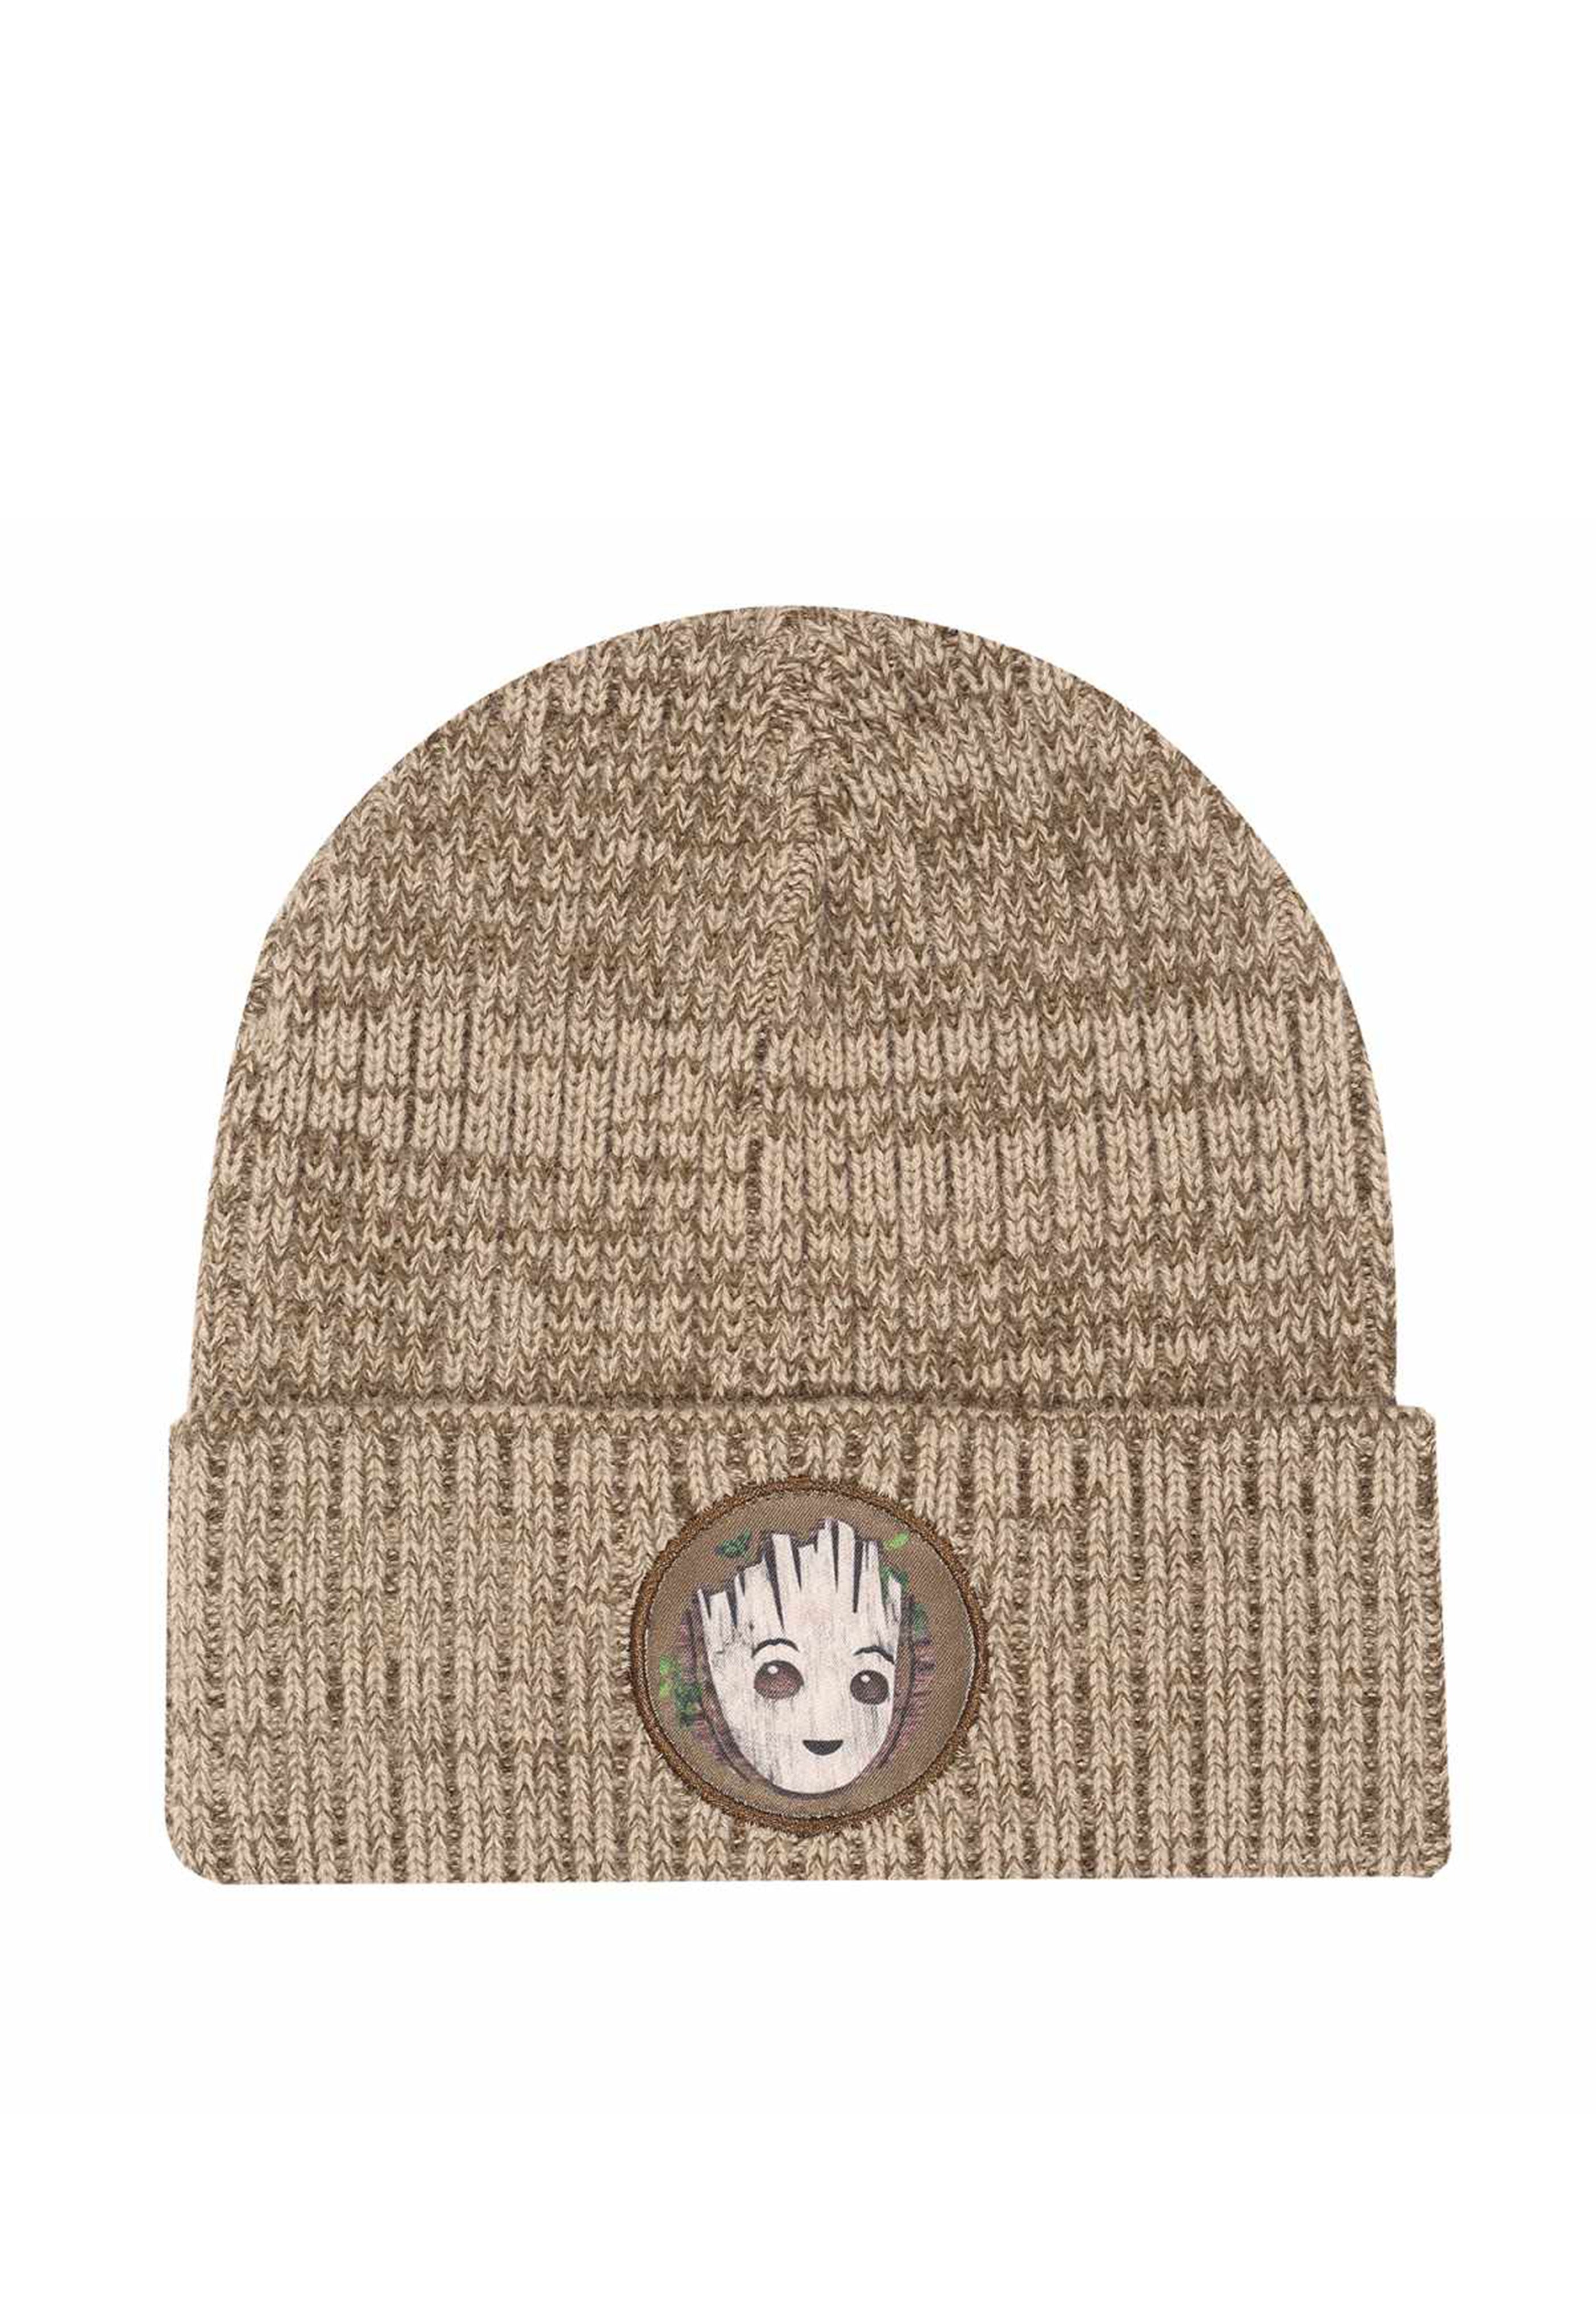 Guardians Of The Galaxy - Baby Groot - Beanie | Neutral-Image